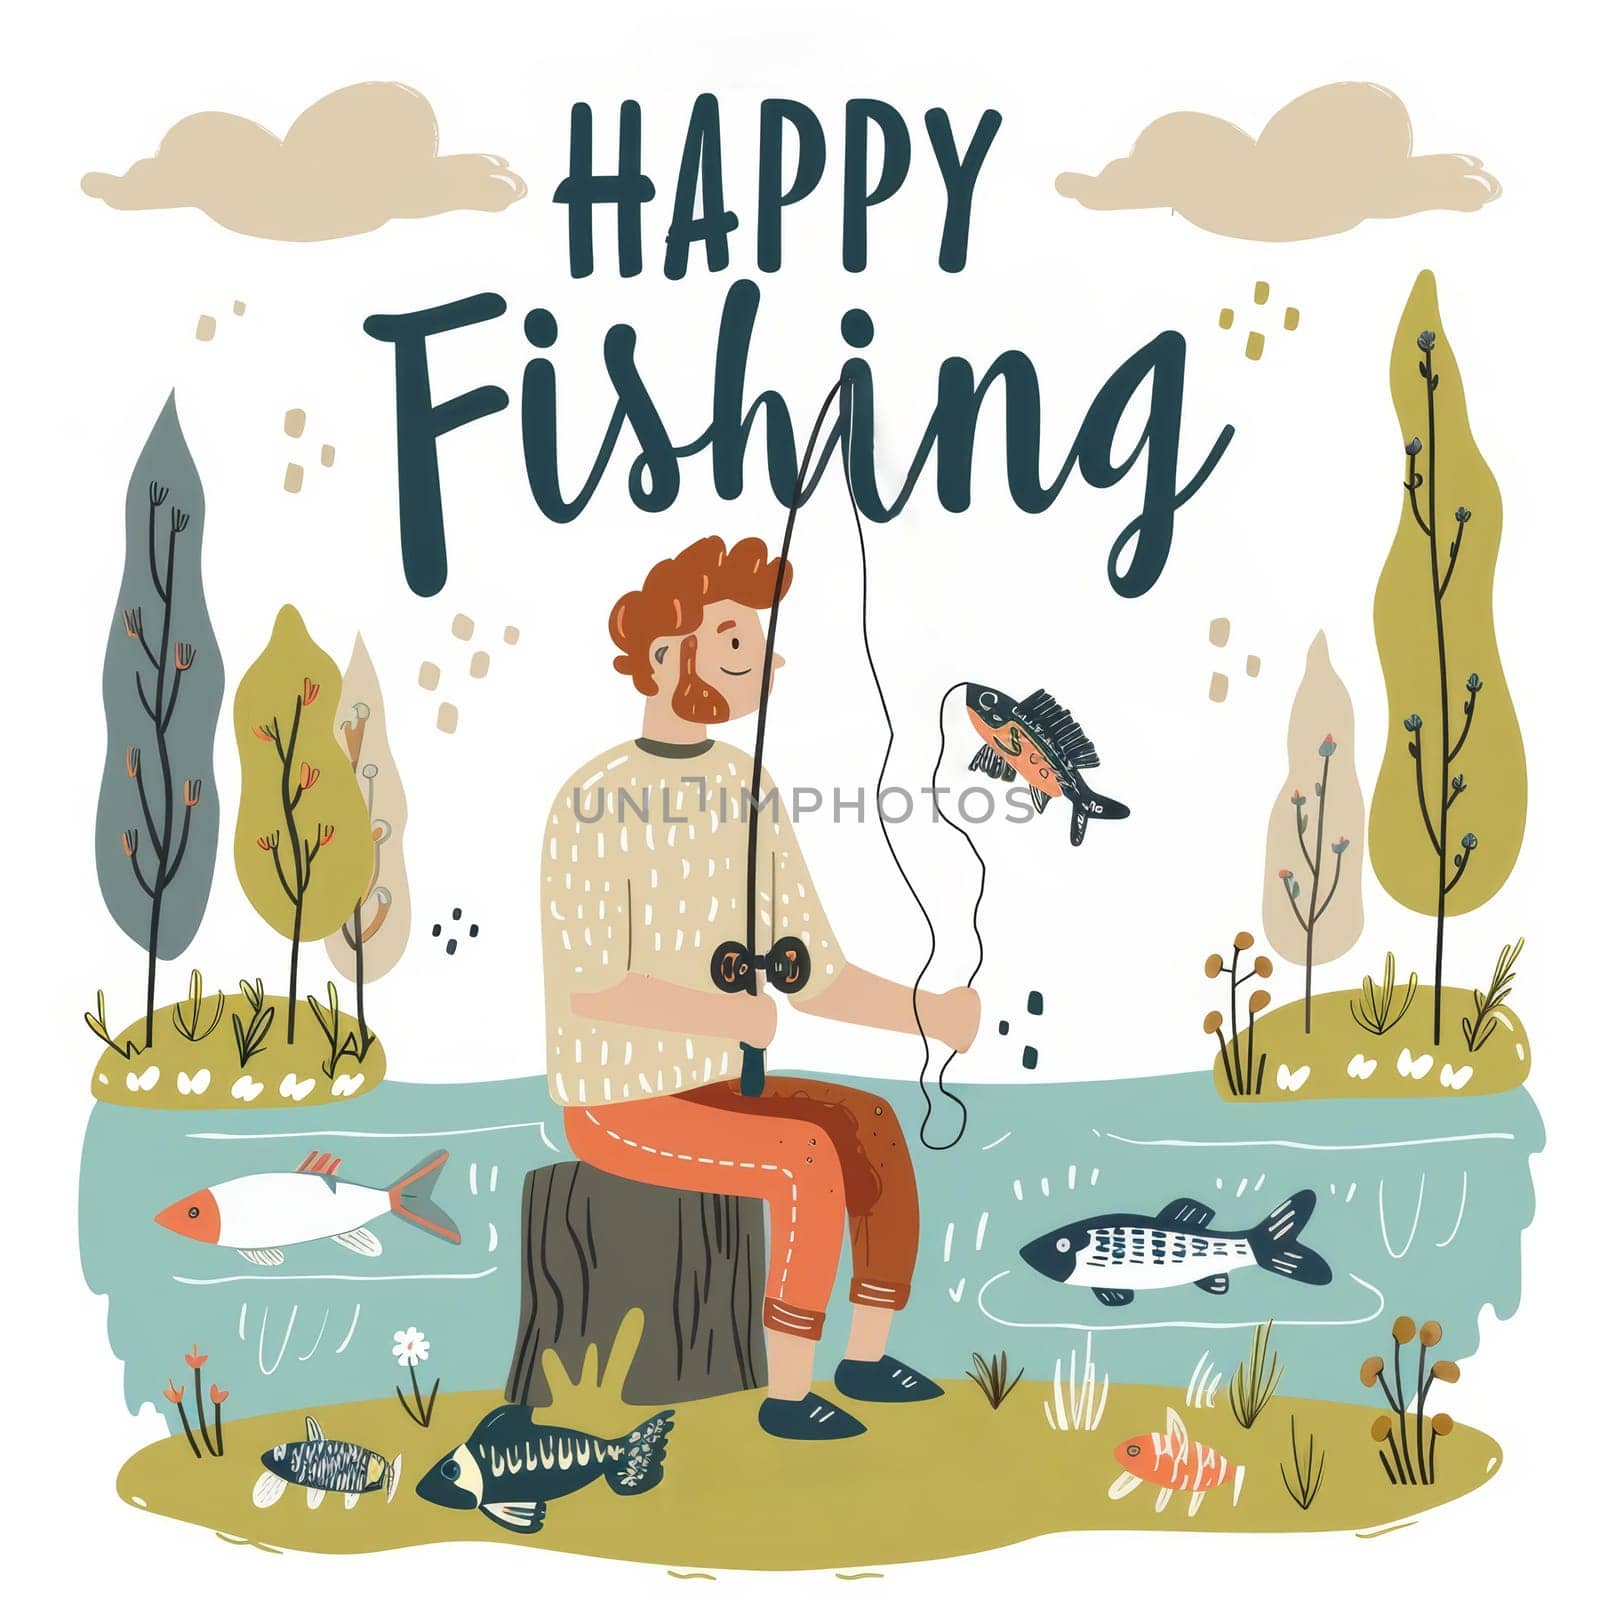 A whimsical illustration captures a solo fishing excursion, with a Happy Happy Fishing message and Fathers Day fish tags adding a festive touch. by sfinks